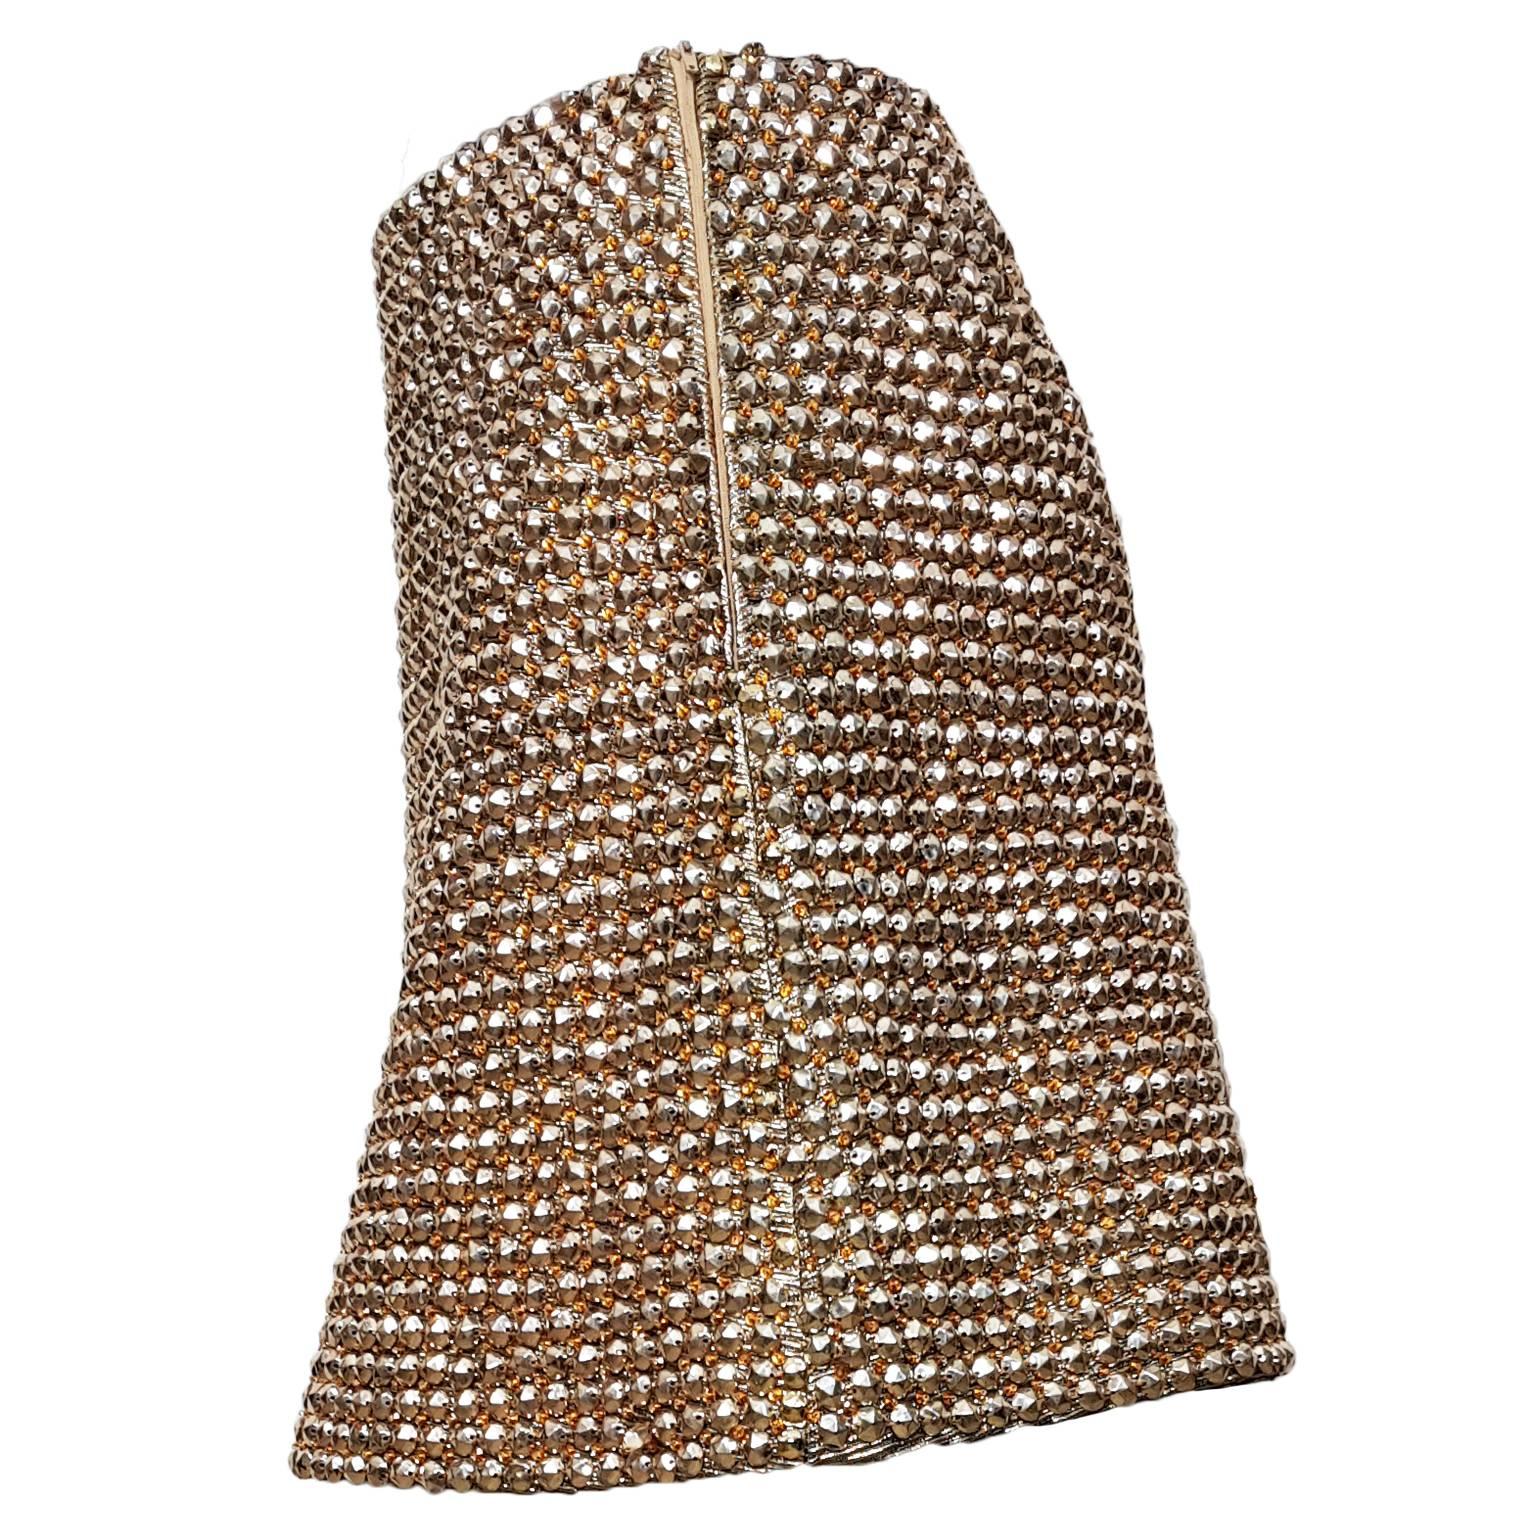 Iconic Gianni Versace couture gold tone beaded skirt aw 1994.
Size : 42 (IT)
Measurements : 
Waist : 70 cm
Length : 38 cm